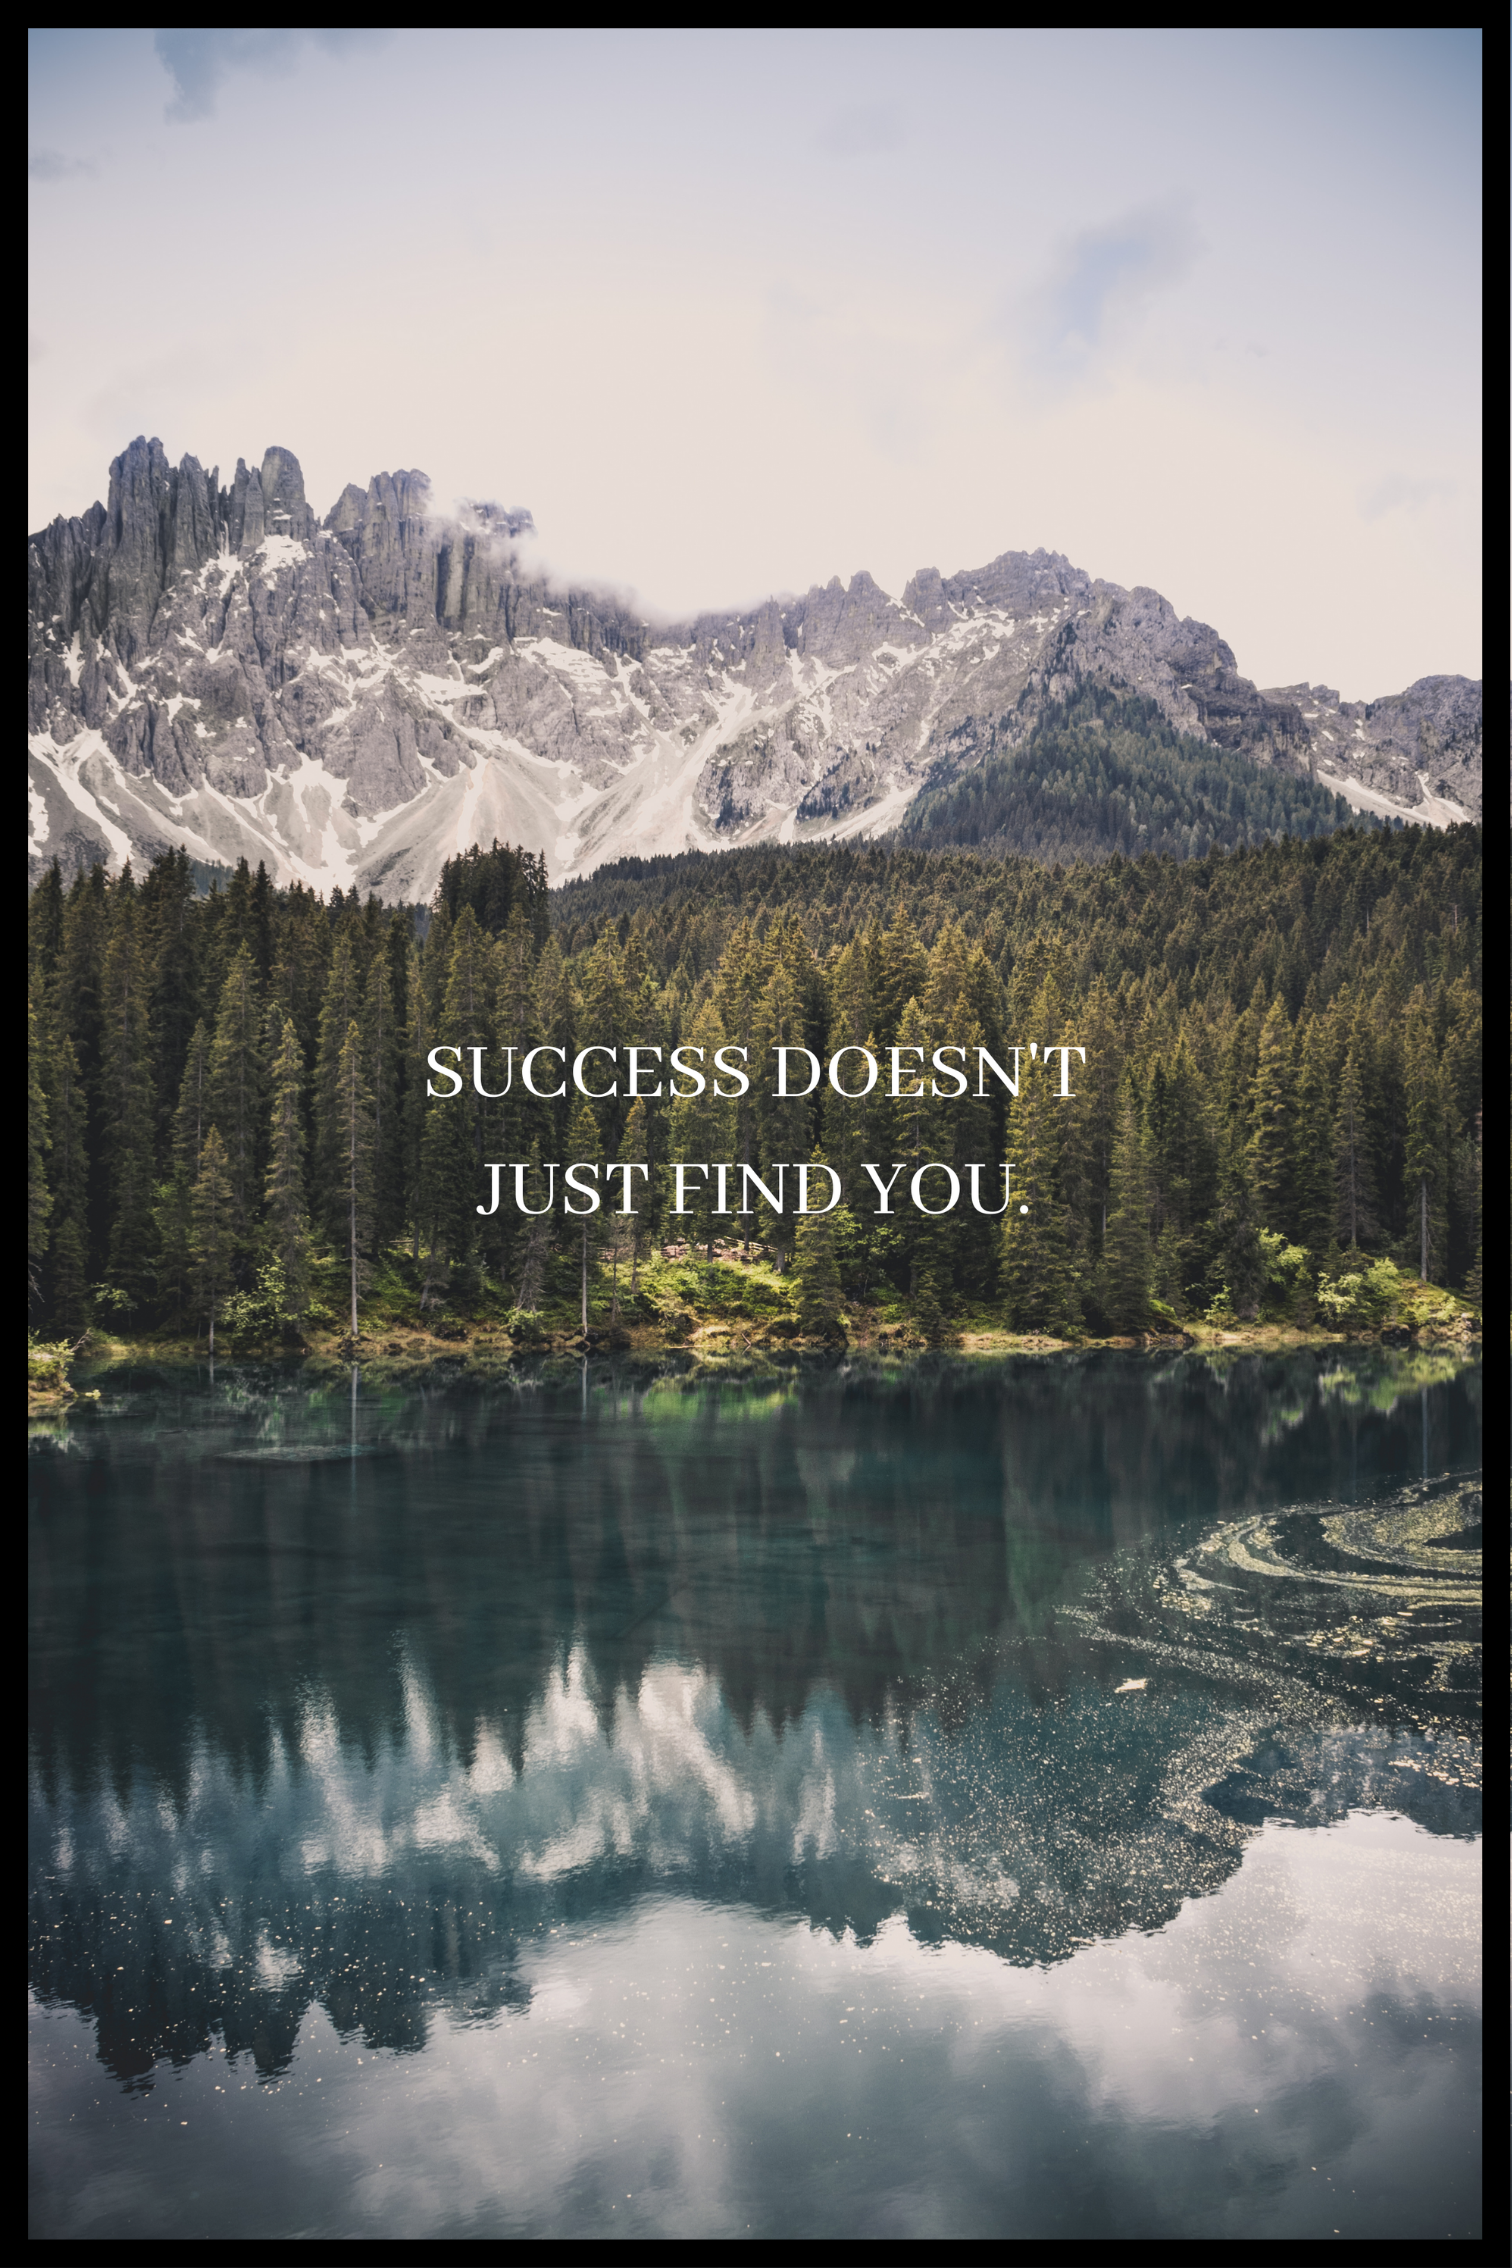 Success doesn't just find you plakat